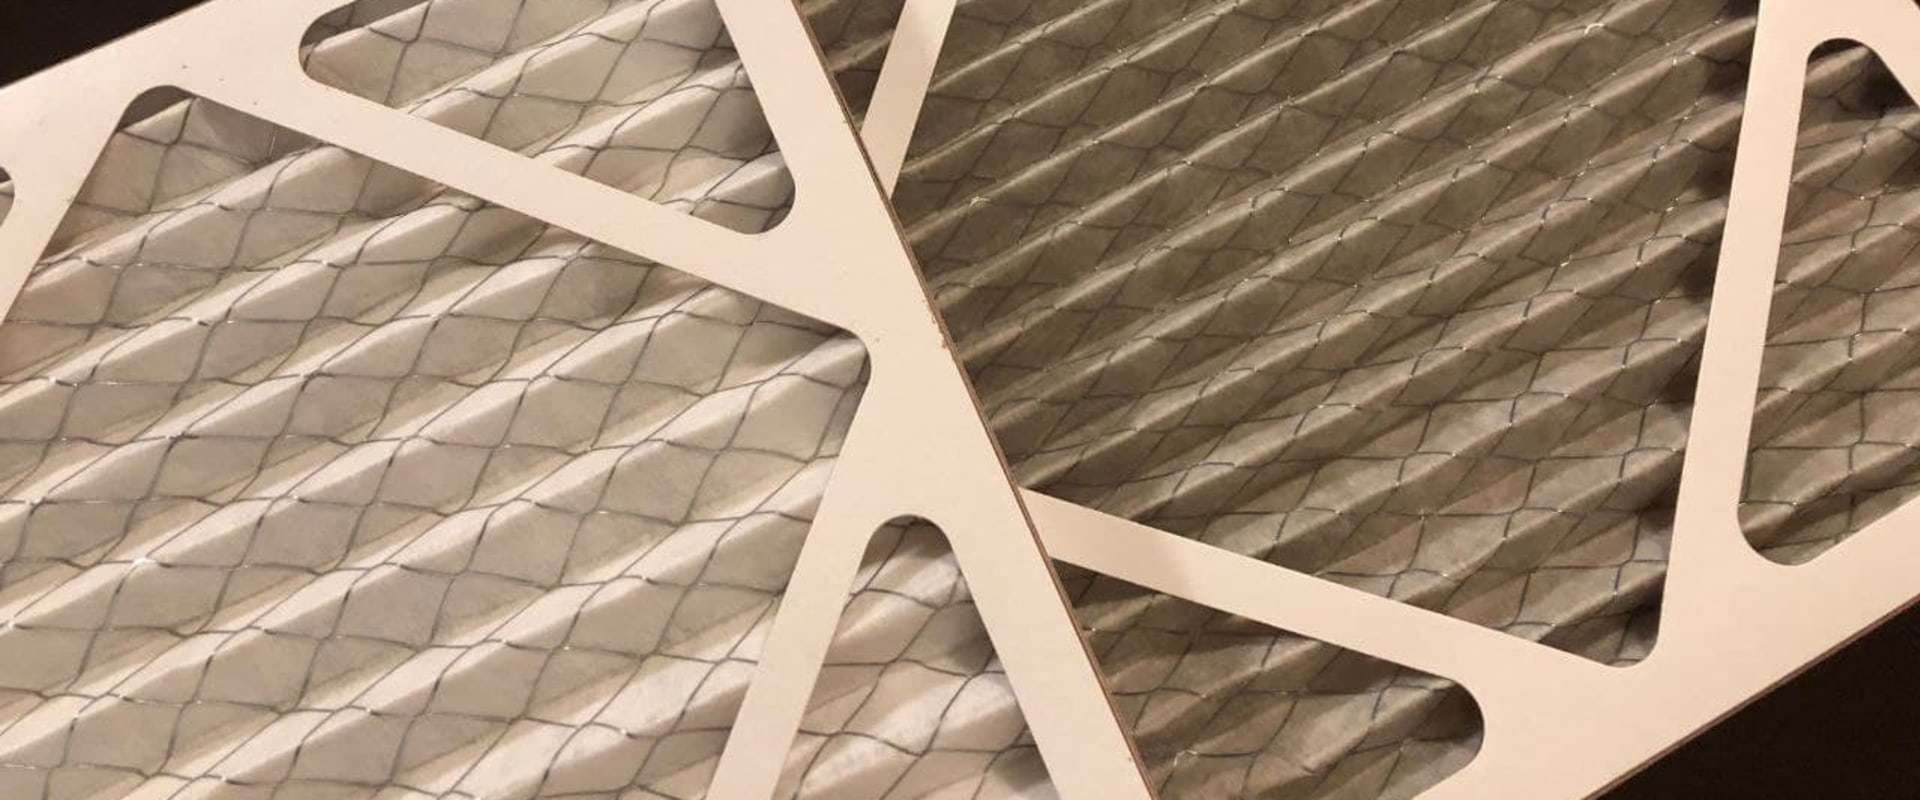 Understanding Furnace Filter and Oven Filter Sizes